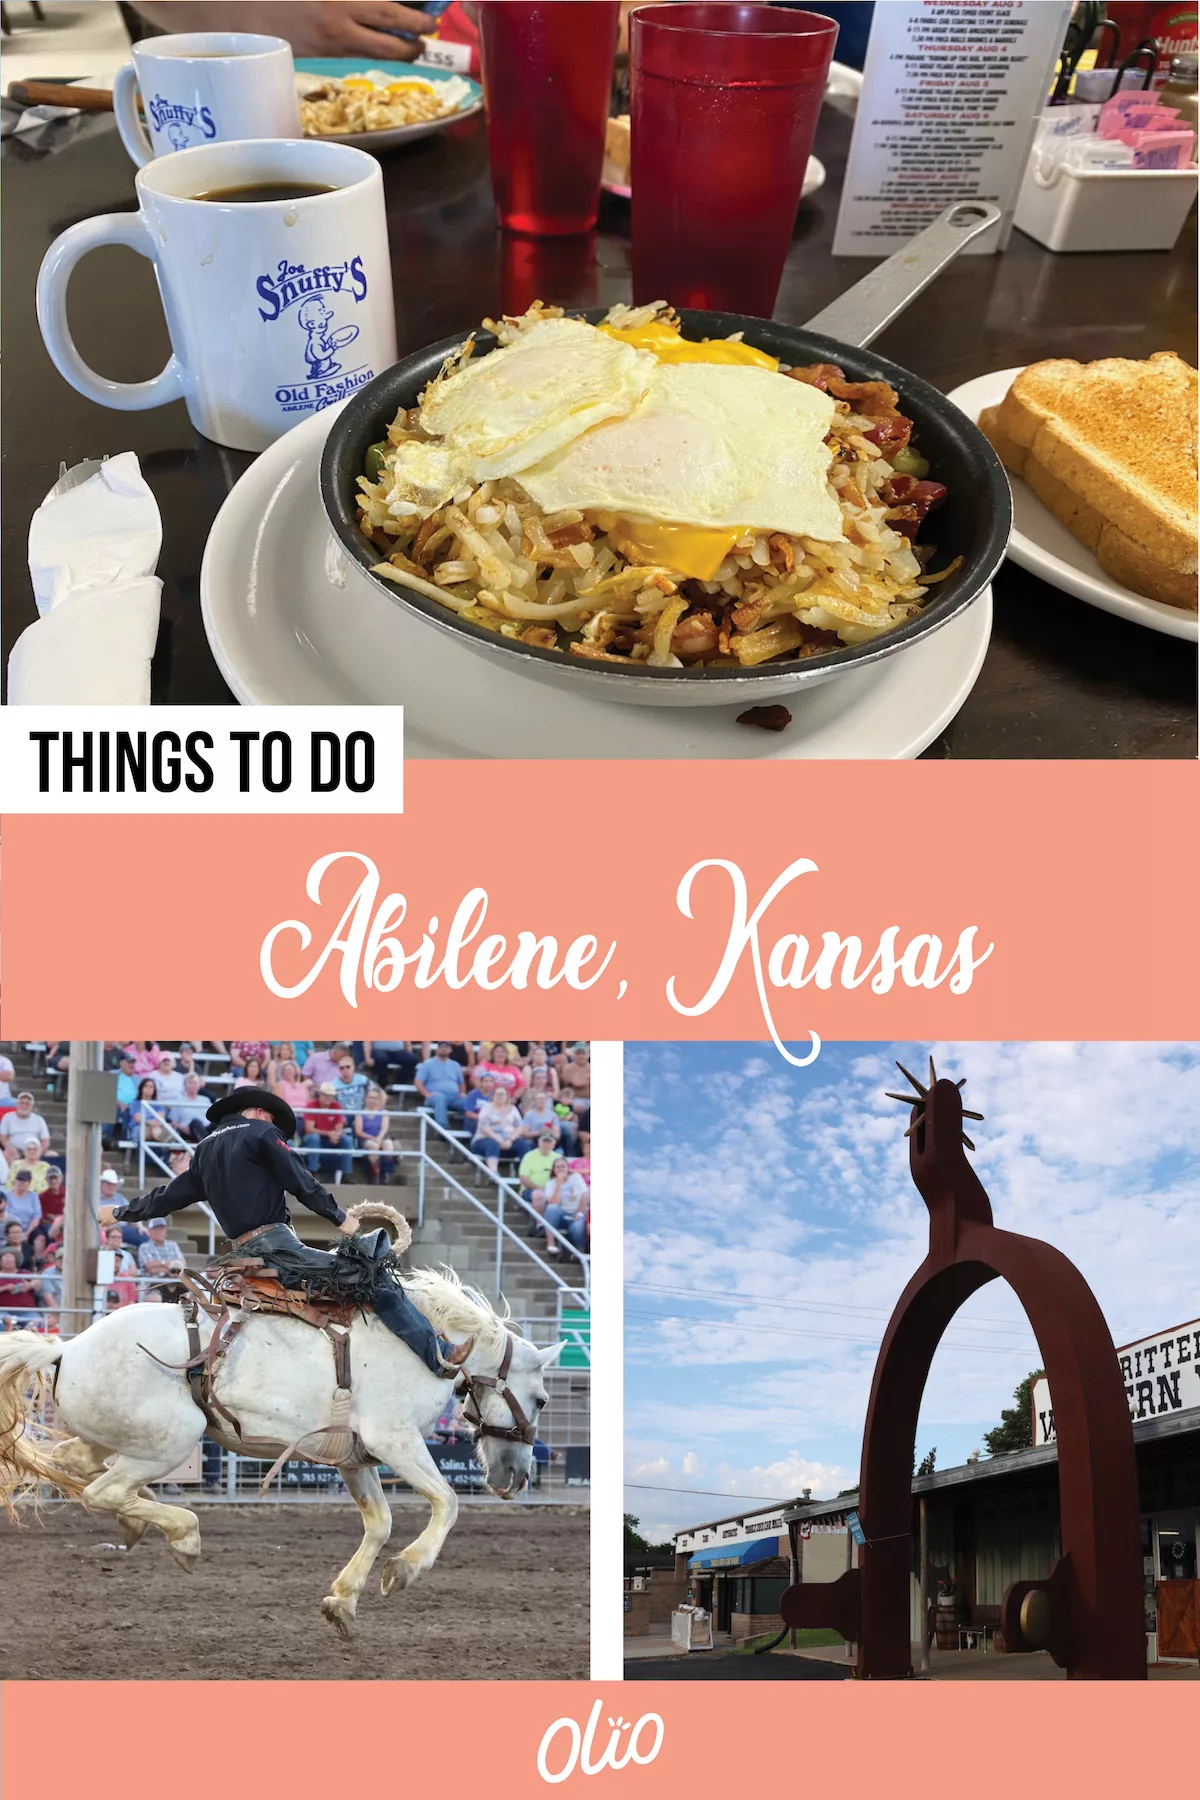 Looking for a small town full of charm and local history? There are so many things to do in Abilene, Kansas! From the historic Seelye Mansion to the Eisenhower Presidential Library and Museum to dinner at the Brookville Hotel, Abilene is full of history and fun for the whole family. #Abilene #Kansas #Midwest